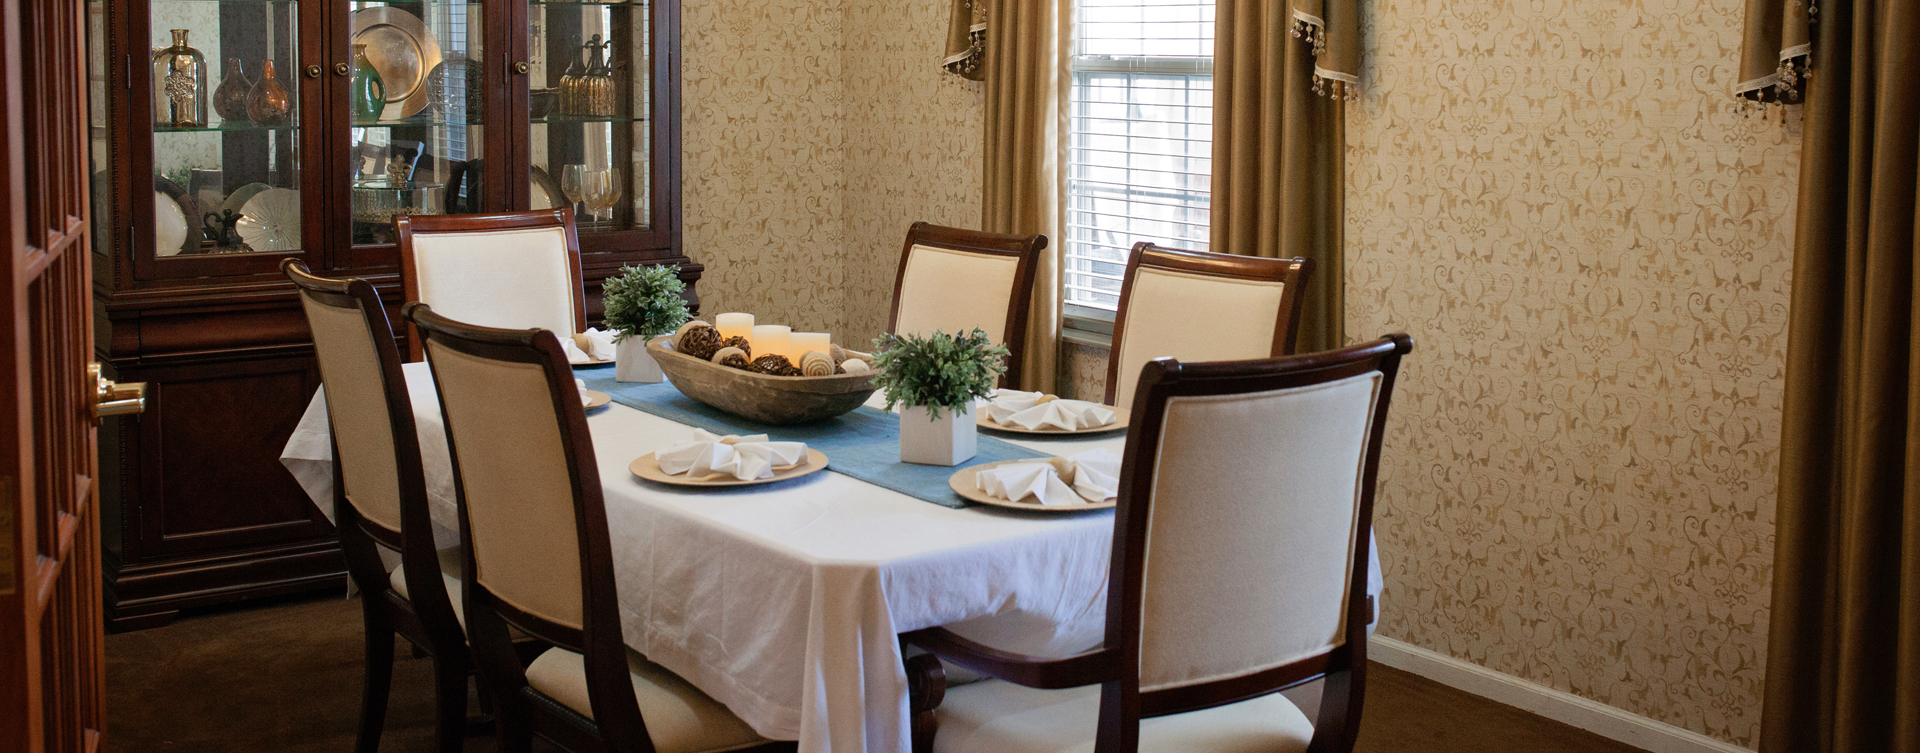 Have fun with themed and holiday meals in the private dining room at Bickford of Marion